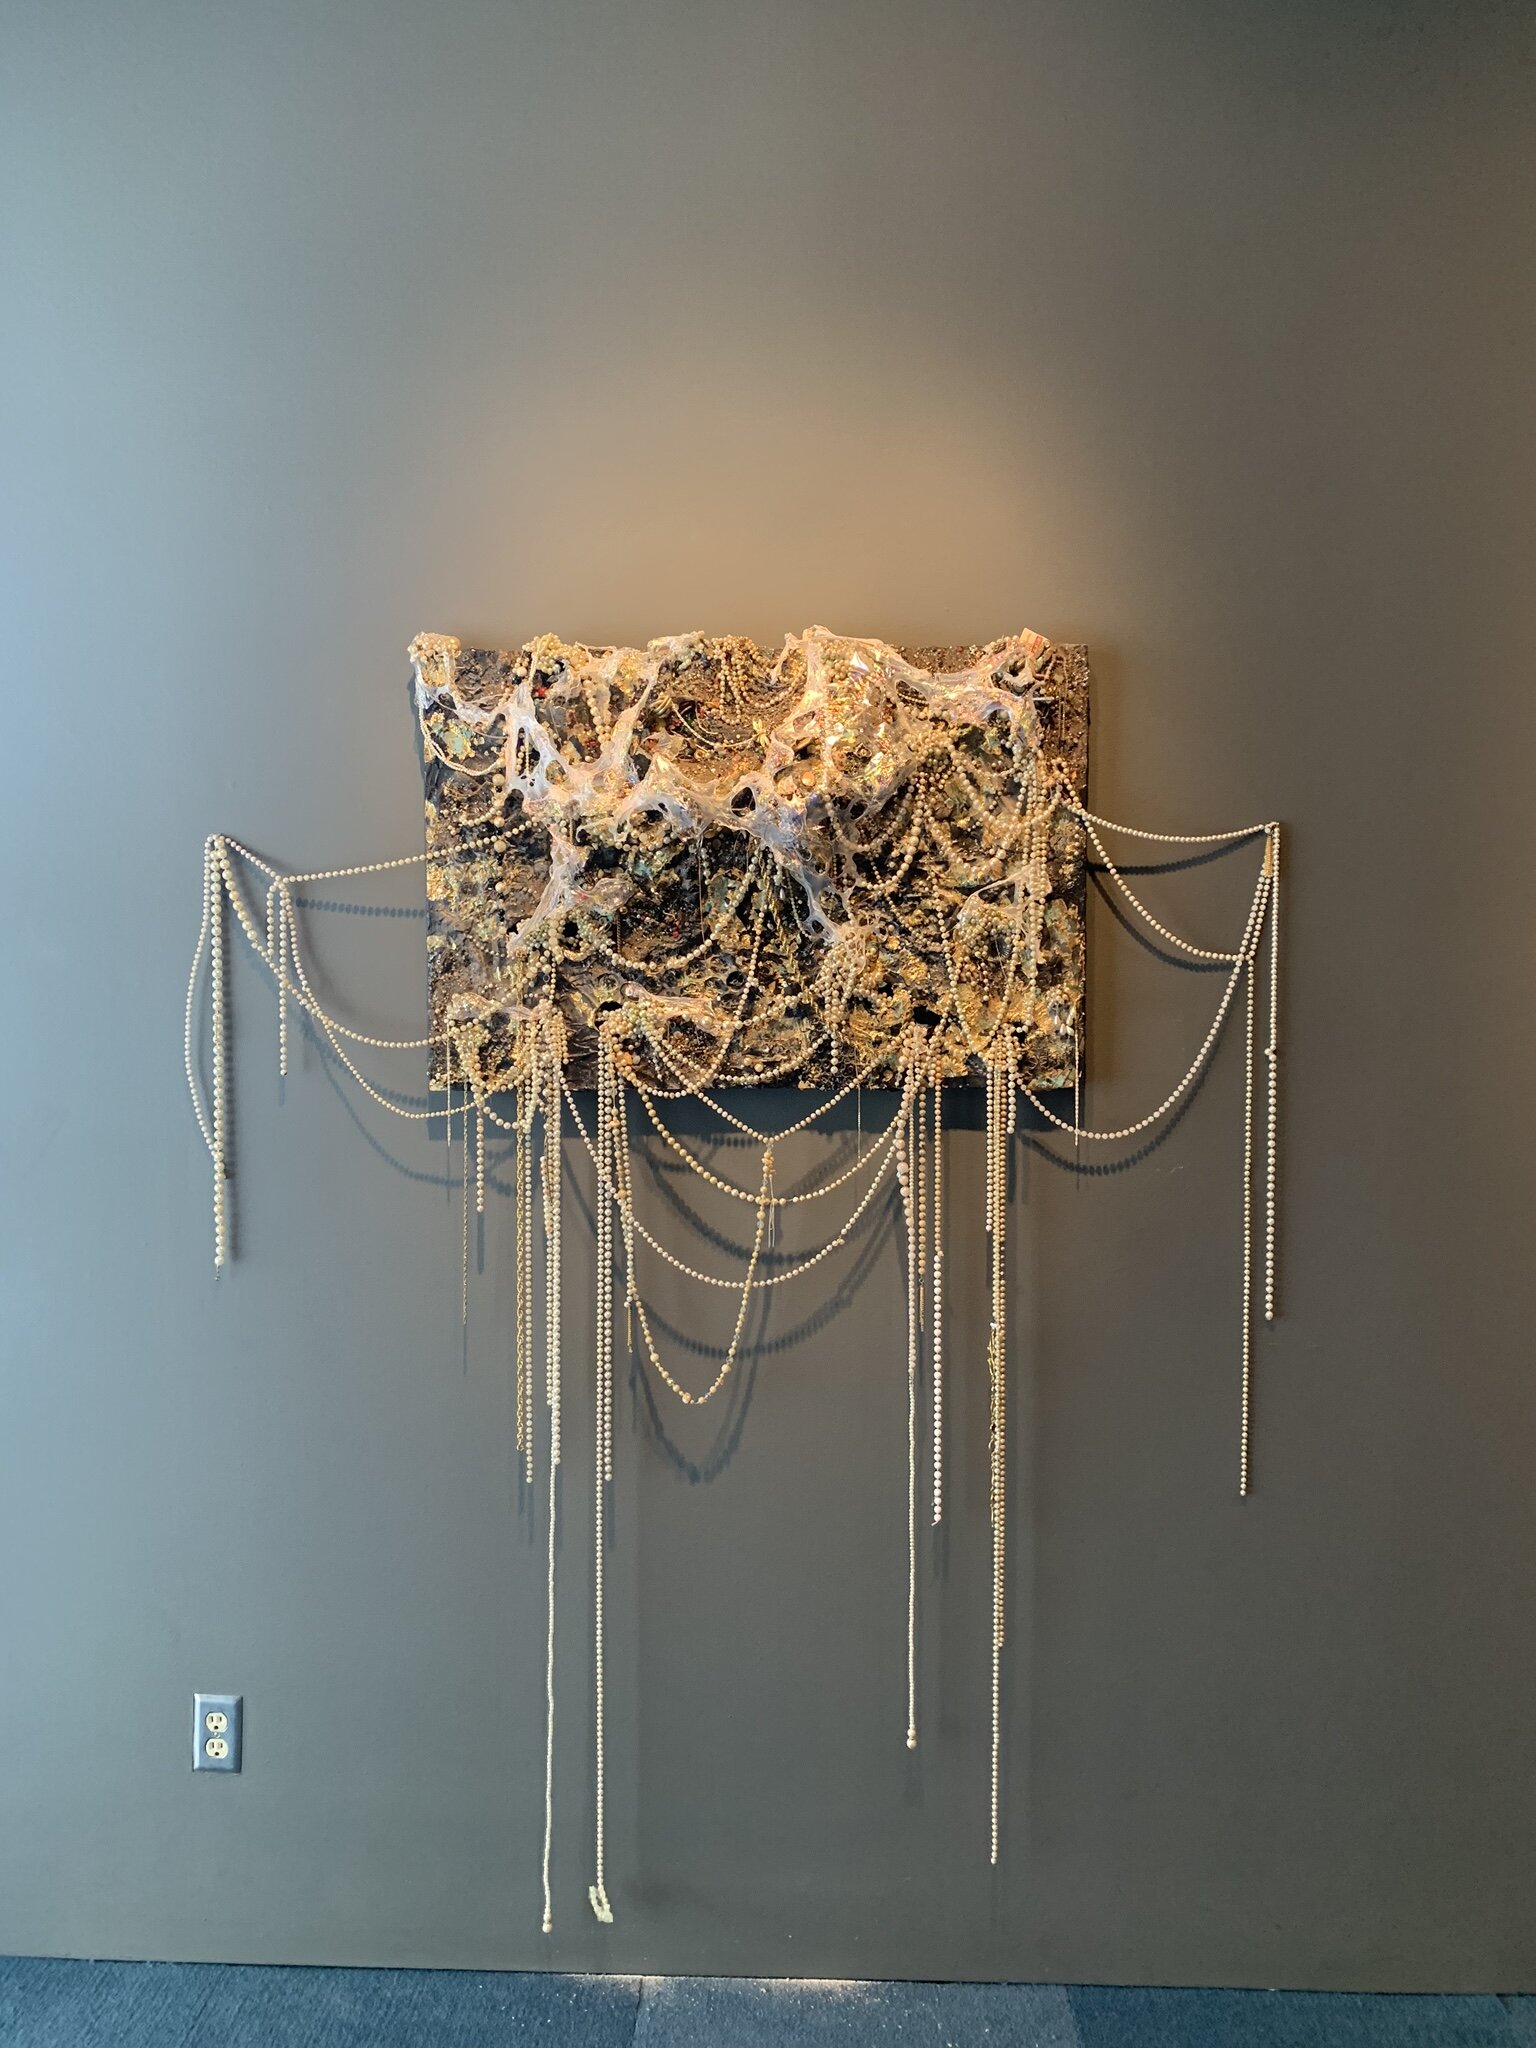   Faux Pearls,  2019, costume jewelry, faux pearls, found objects, metal screen, cellophane, and resin on panel, approx. 36x24"  